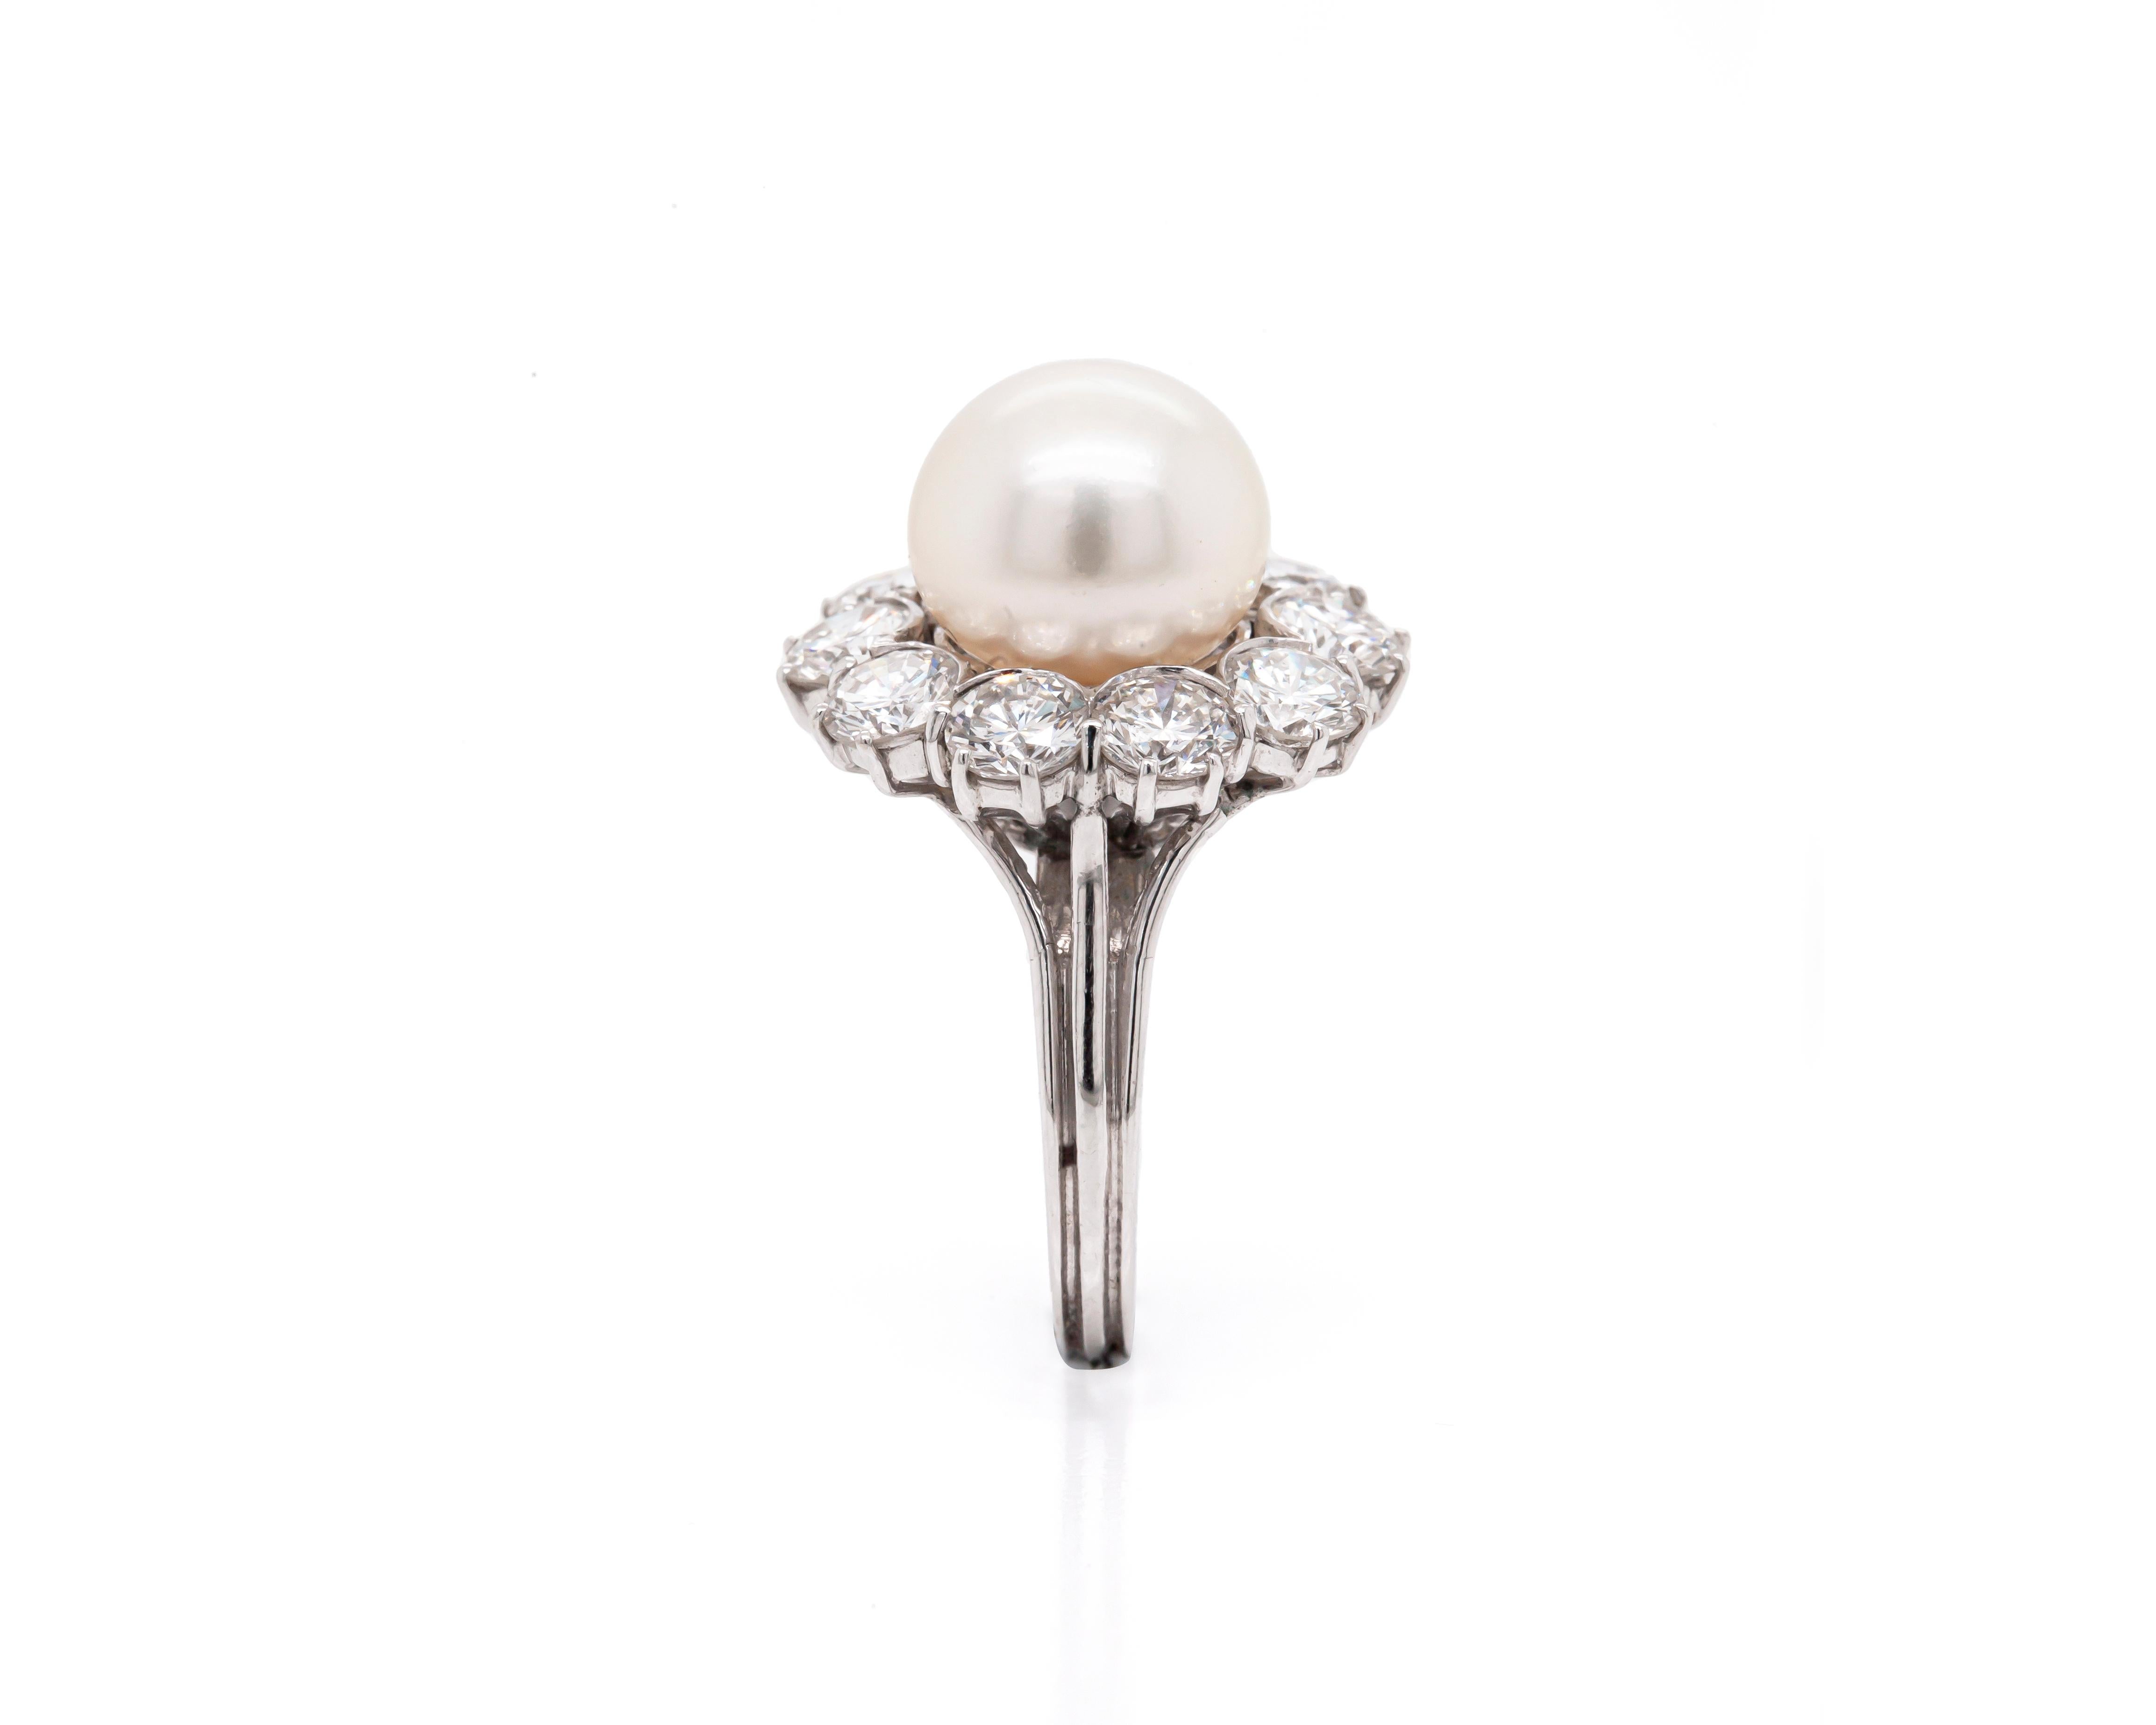 This charming cluster engagement ring, exquisitely crafted from 18 carat white gold, is centred with a beautiful South Sea pearl measuring 10.35mm. Surrounding the delicate pearl and accenting its lovely lustre there are 10 fine quality round